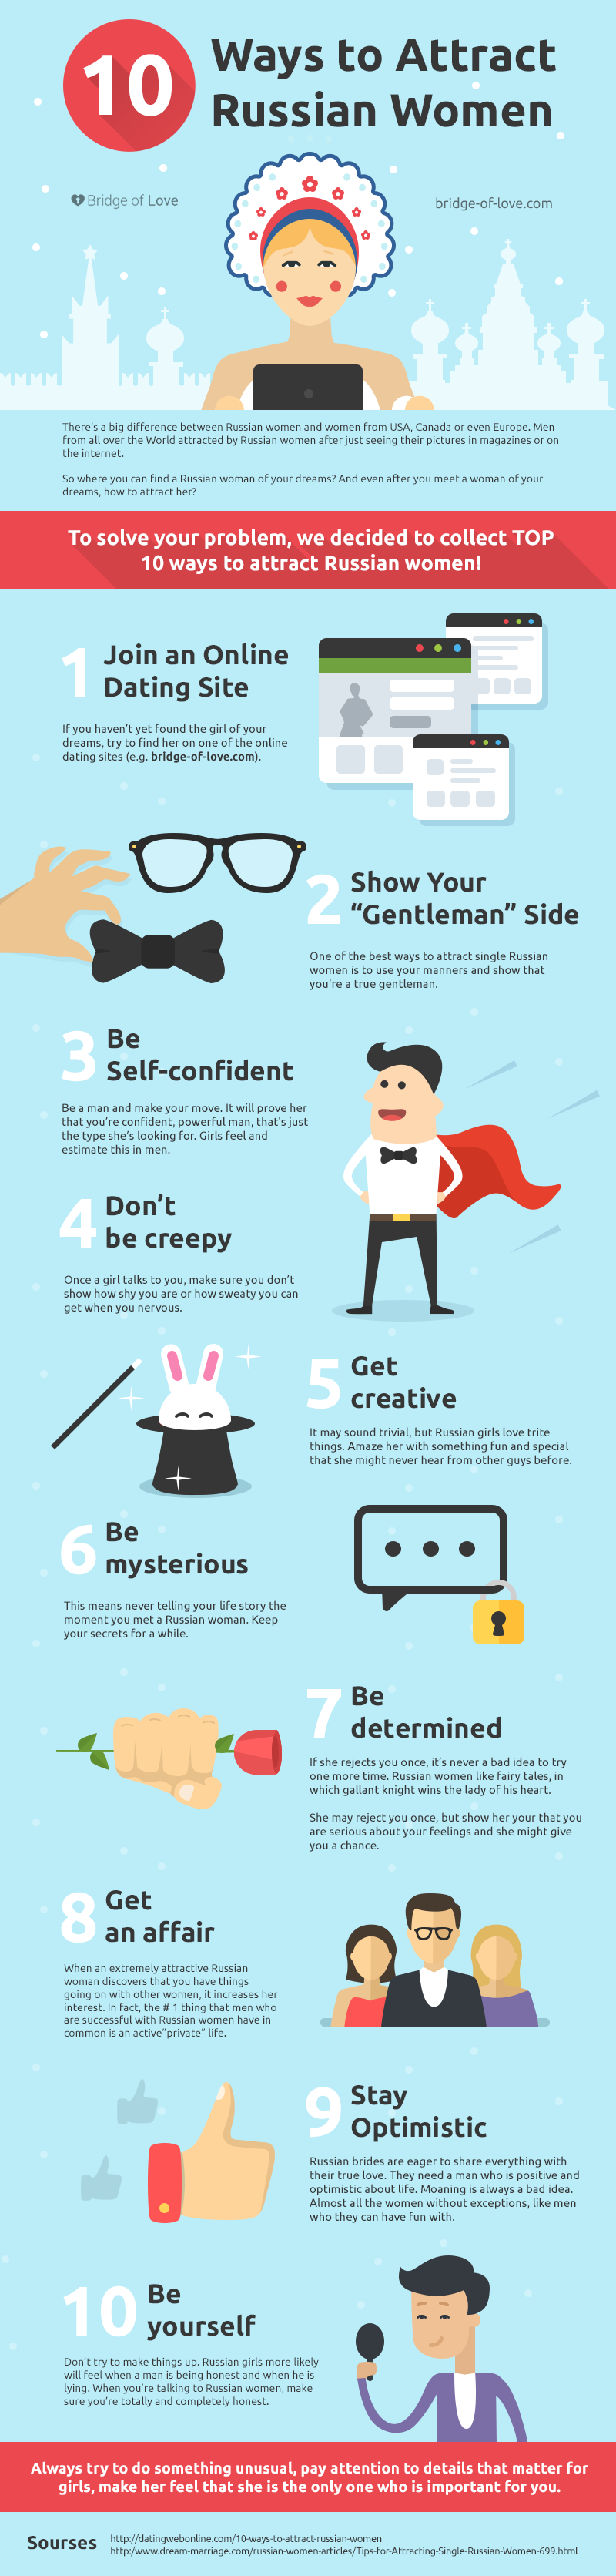 10 Ways to Attract Russian Women - Infographic